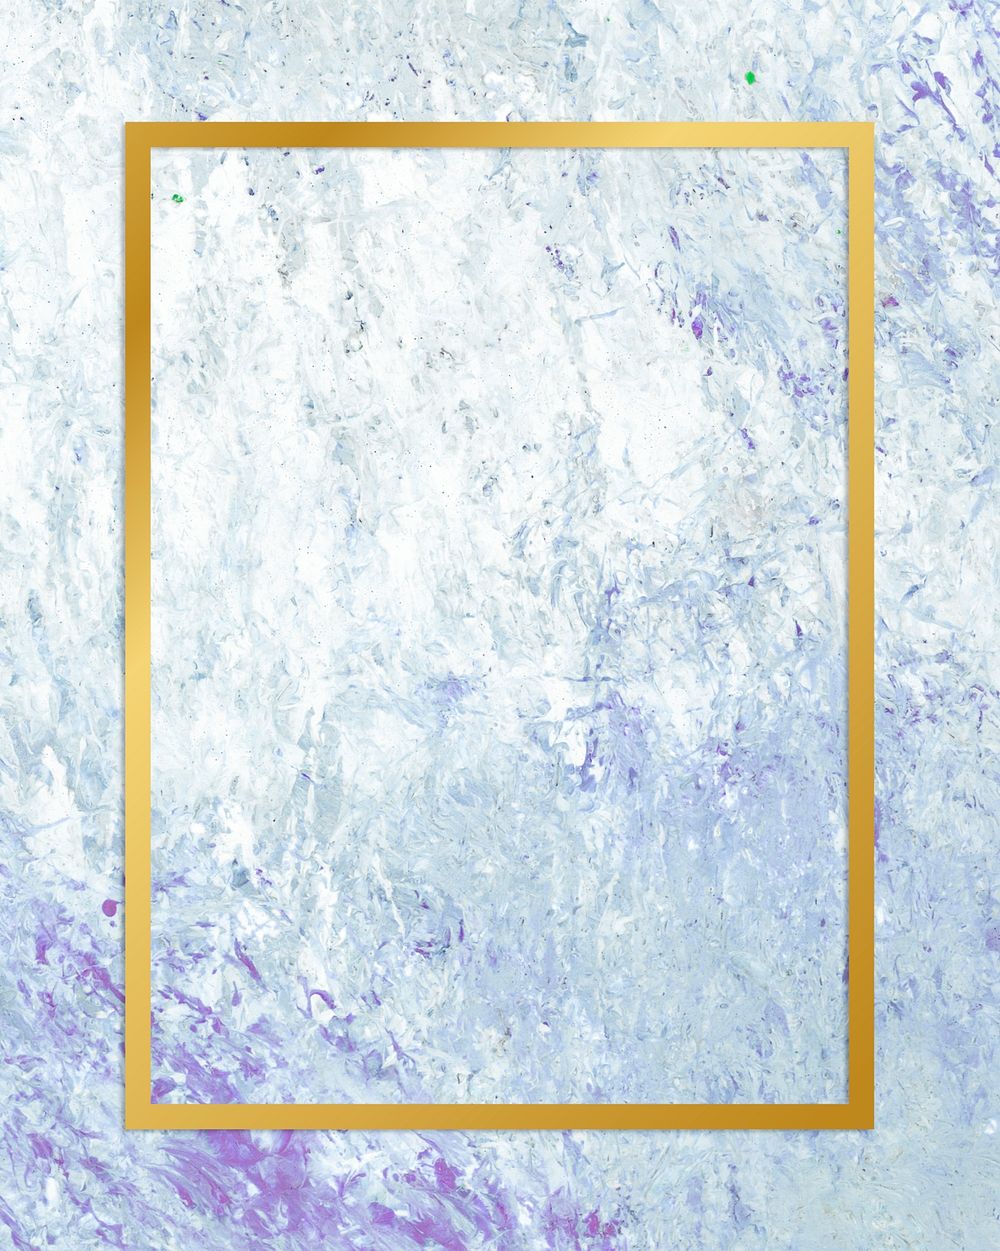 Gold rectangle frame on a blue abstract patterned background